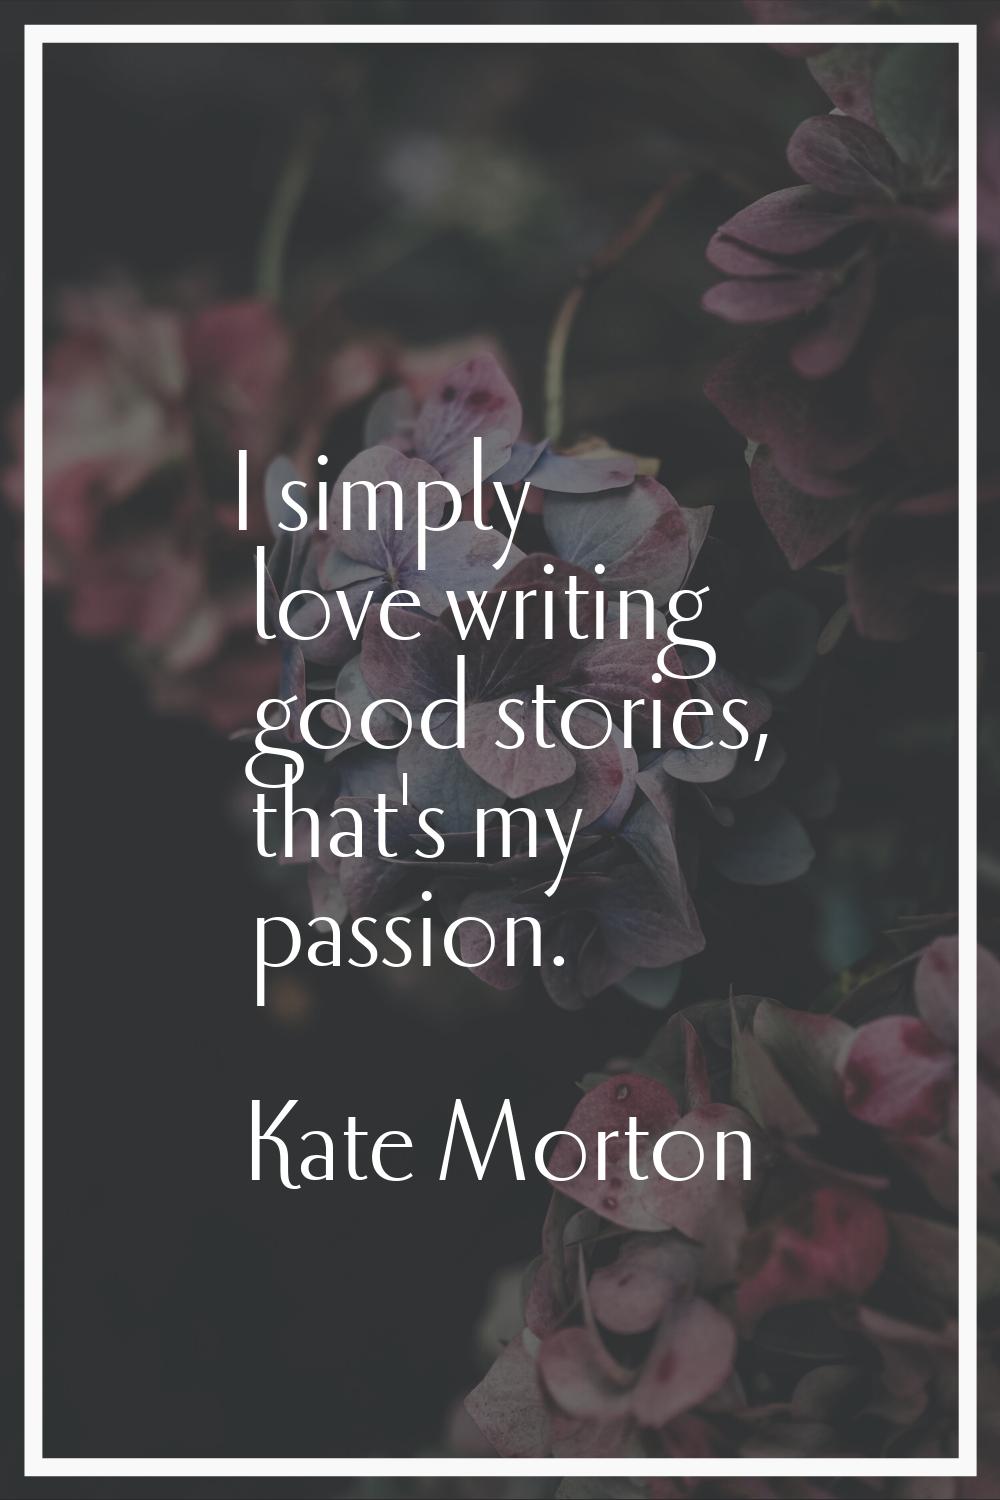 I simply love writing good stories, that's my passion.